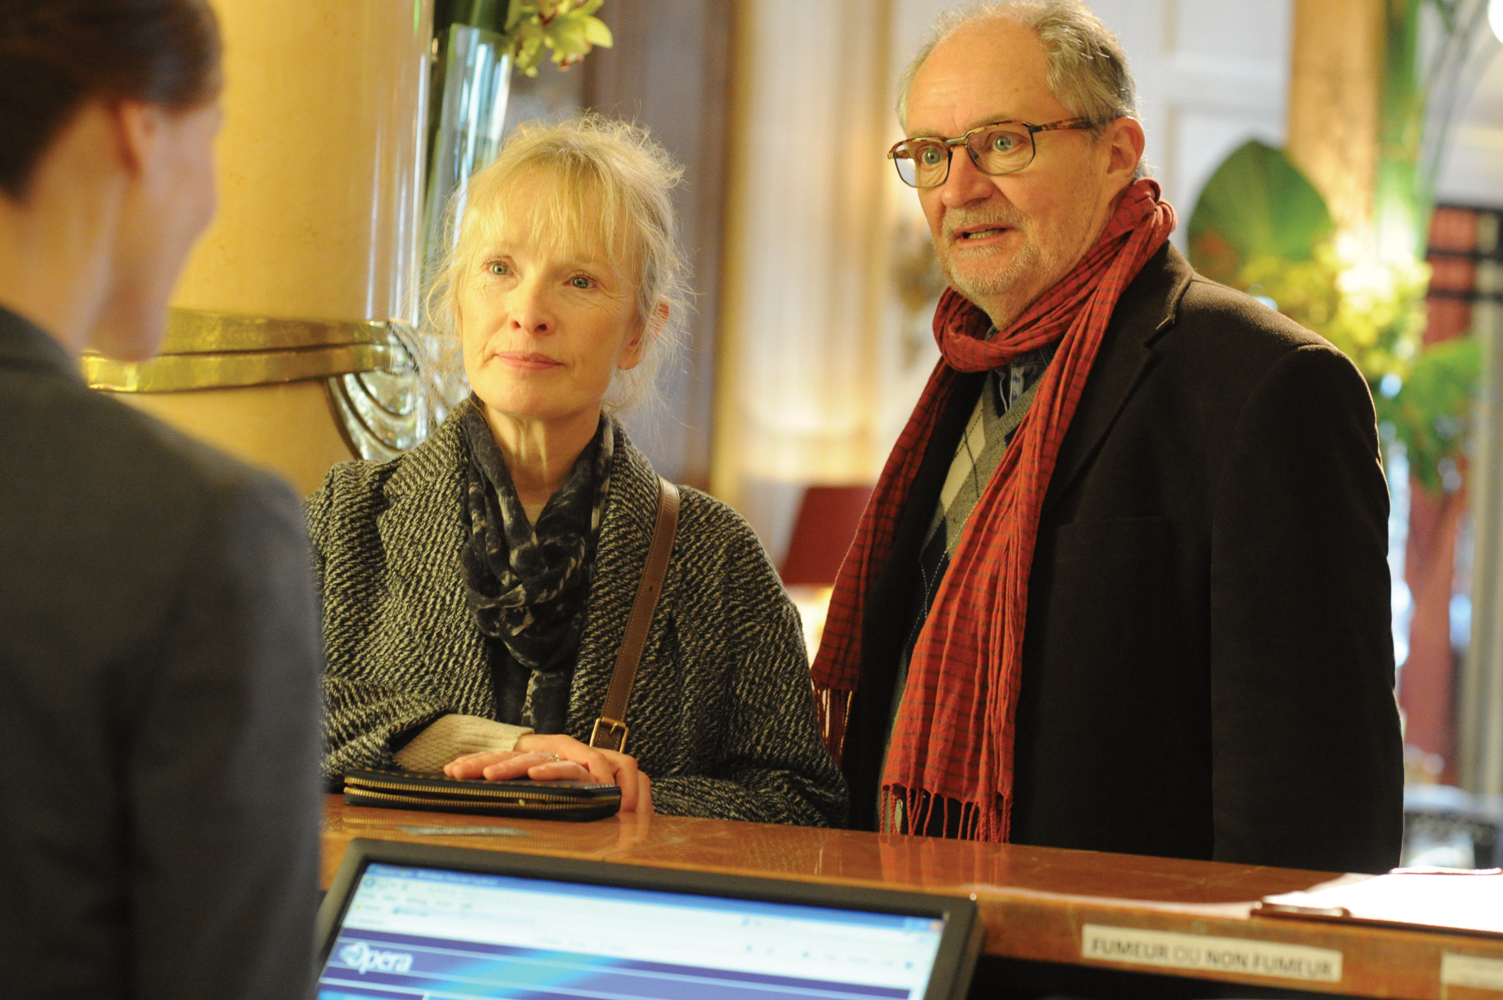 http://www.ifi.ie/wp-content/uploads/le-weekenddirected-by-roger-michellstarring-lindsay-duncan-and-jim-broadbent4.jpg